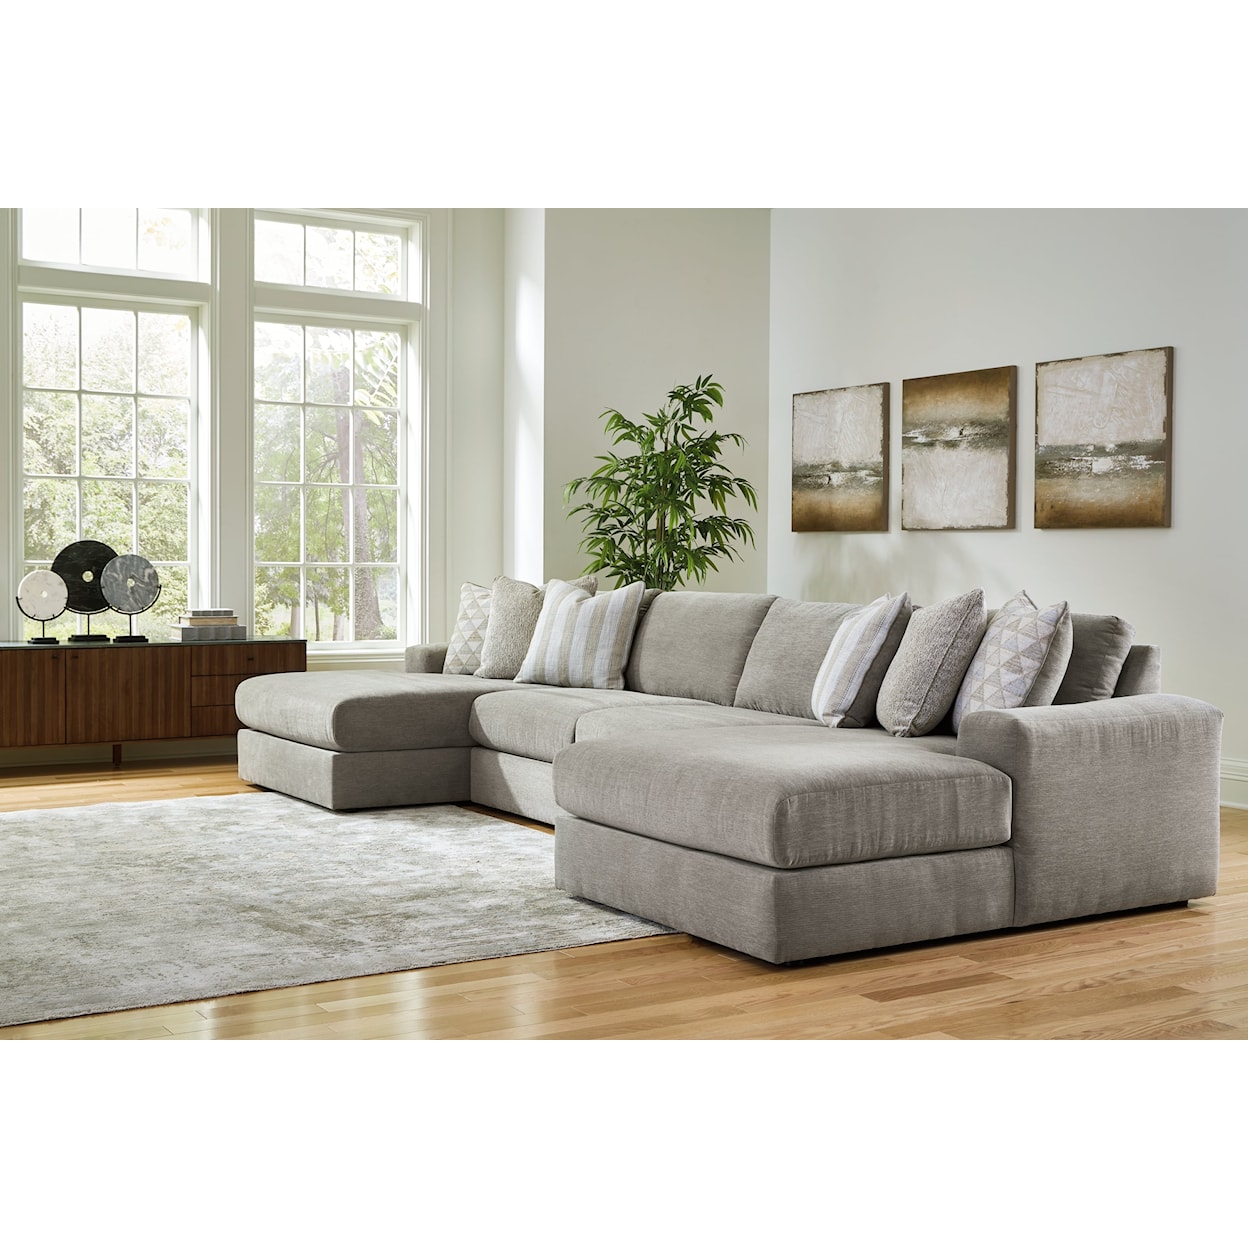 Ashley Furniture Signature Design Avaliyah 4-Piece Double Chaise Sectional